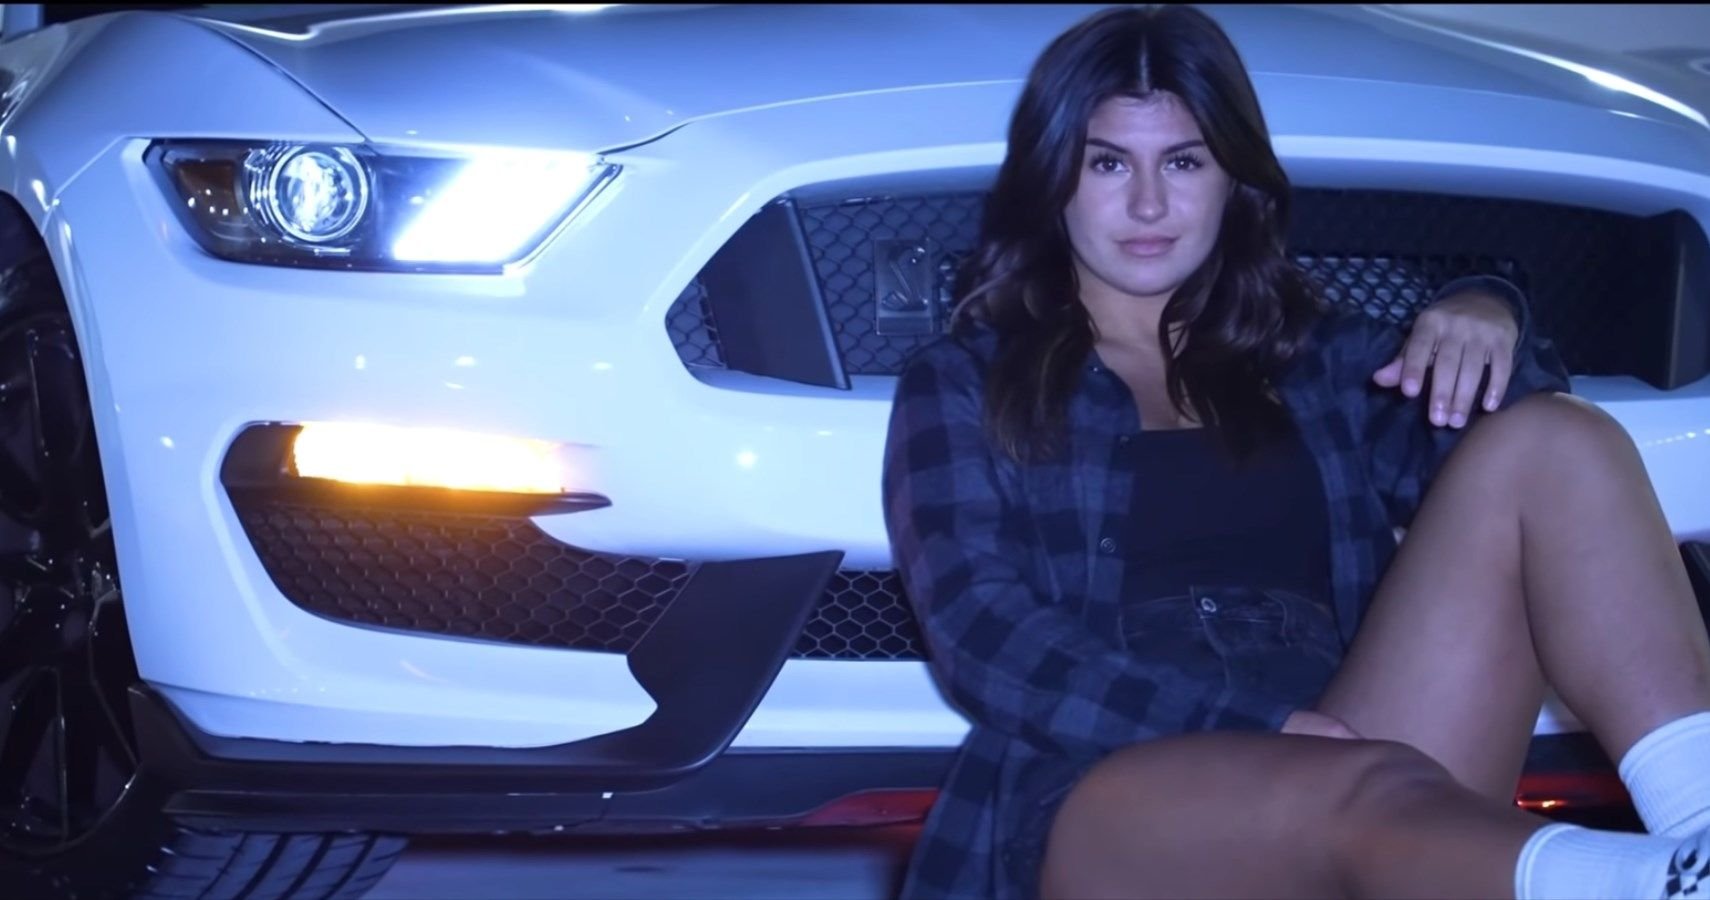 Watch: Hailie Deegan Shows Off Her Mustang's Upgrades During Photoshoot